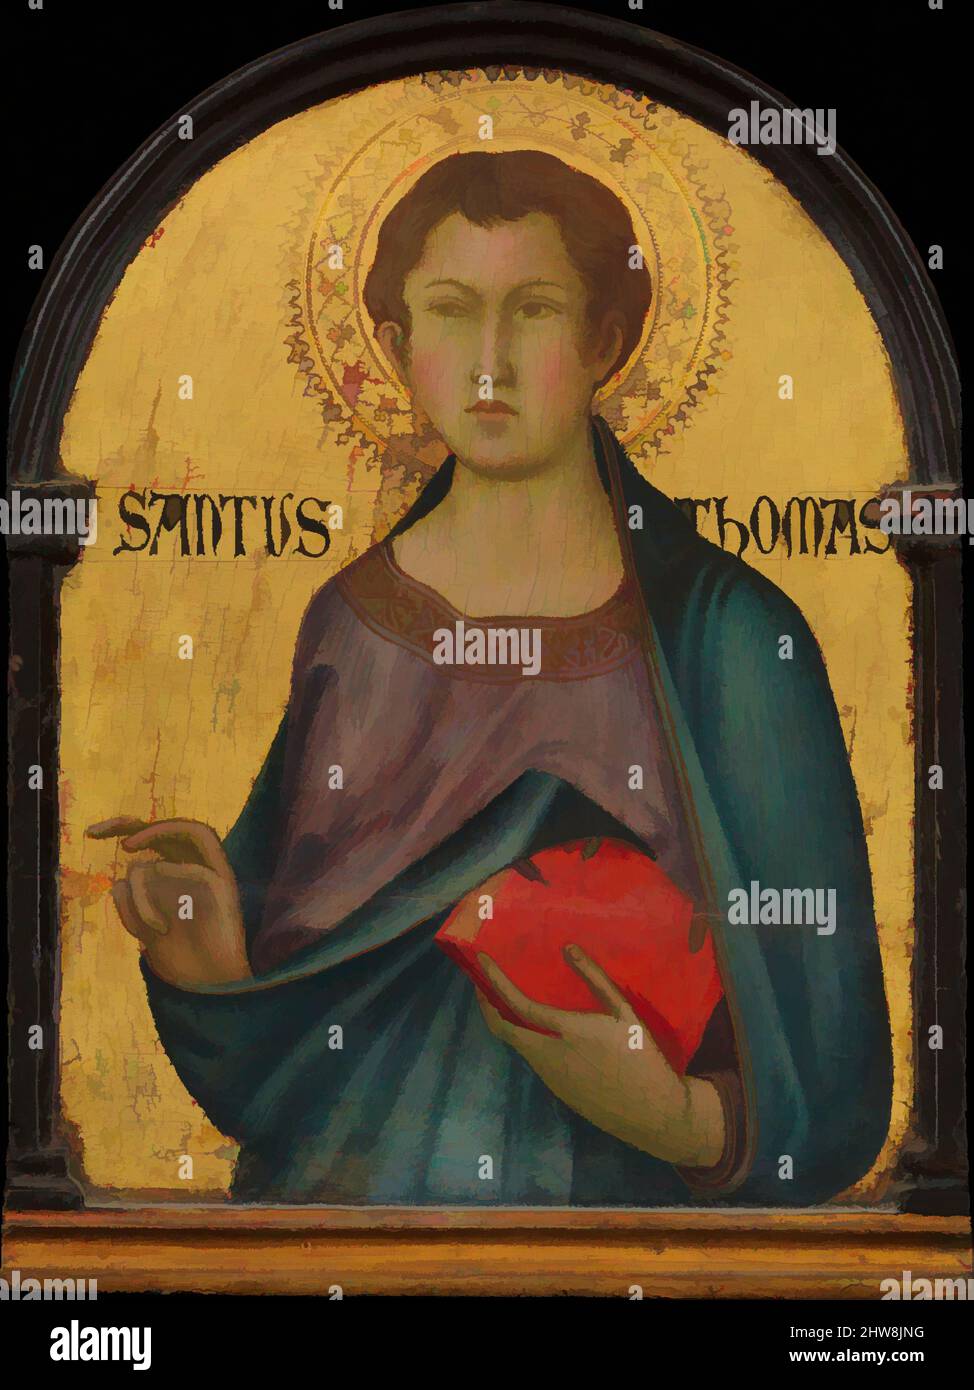 Art inspired by Saint Thomas, ca. 1317–19, Tempera on wood, gold ground, Overall, with arched top and engaged frame, 11 5/8 x 8 5/8 in. (29.5 x 21.9 cm); painted surface 10 3/8 x 7 3/4 in. (26.4 x 19.7 cm), Paintings, Workshop of Simone Martini (Italian, Siena, active by 1315–died 1344, Classic works modernized by Artotop with a splash of modernity. Shapes, color and value, eye-catching visual impact on art. Emotions through freedom of artworks in a contemporary way. A timeless message pursuing a wildly creative new direction. Artists turning to the digital medium and creating the Artotop NFT Stock Photo